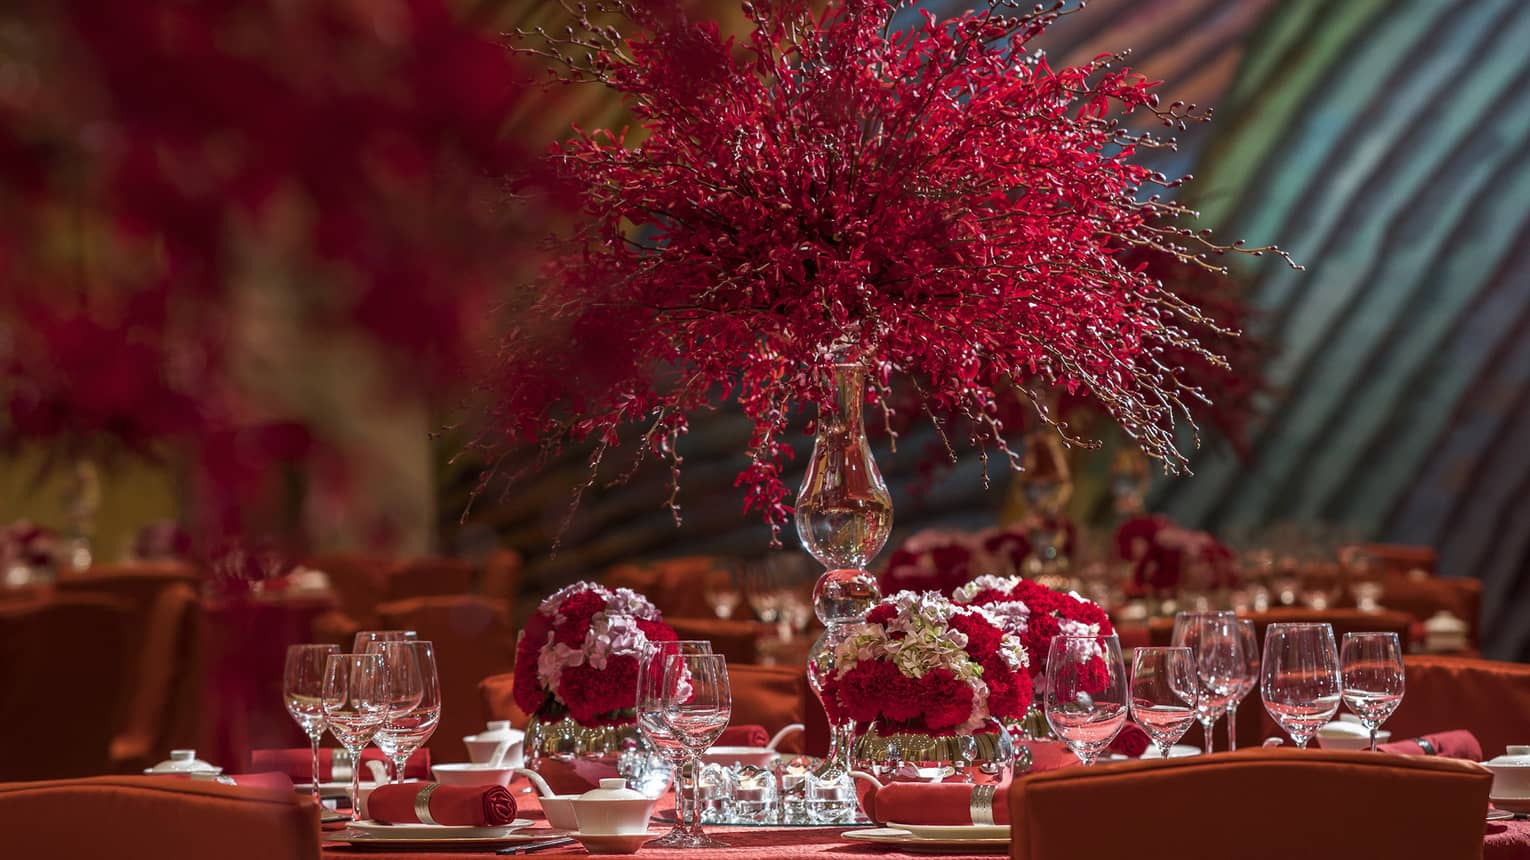 Close-up of banquet dining table with red tablecloth, red and white flower displays